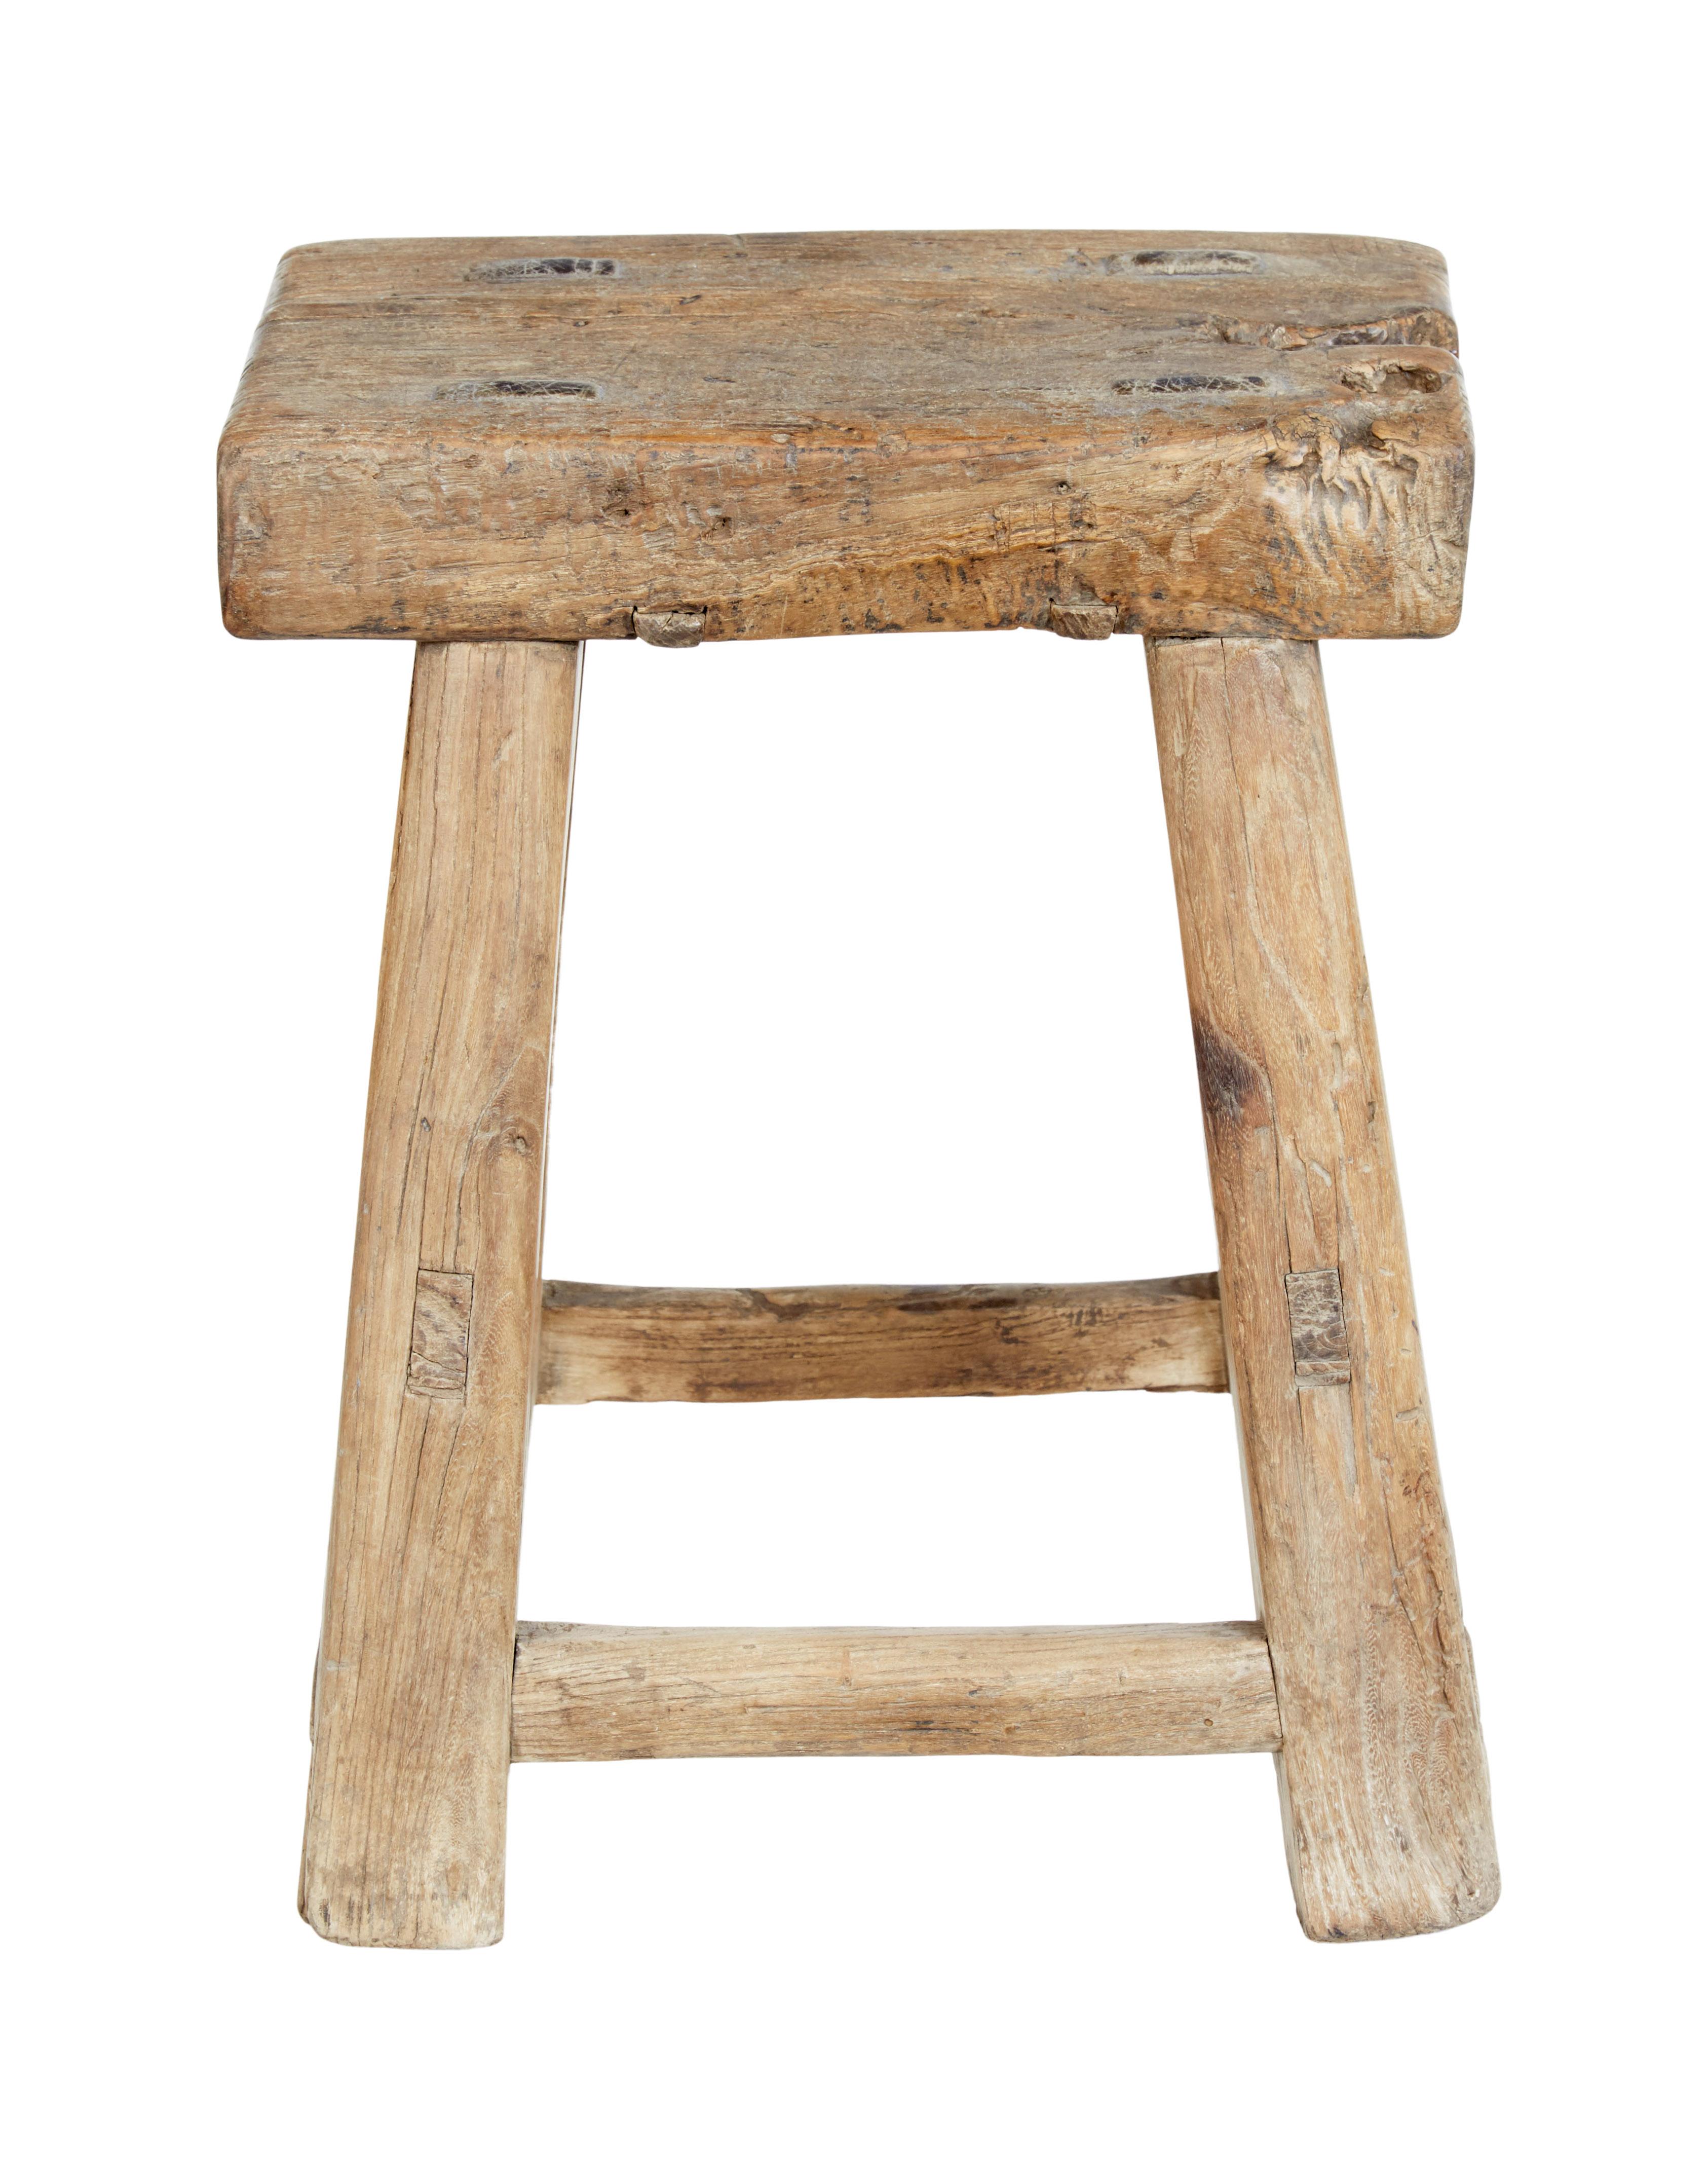 Rustic Chinese 19th century hardwood stool circa 1880.

A Fine piece of traditional Chinese craftmanship. Made from hardwood and constructed using joints. Made from real character pieces of wood with hollows, knots and splits.

Structurally